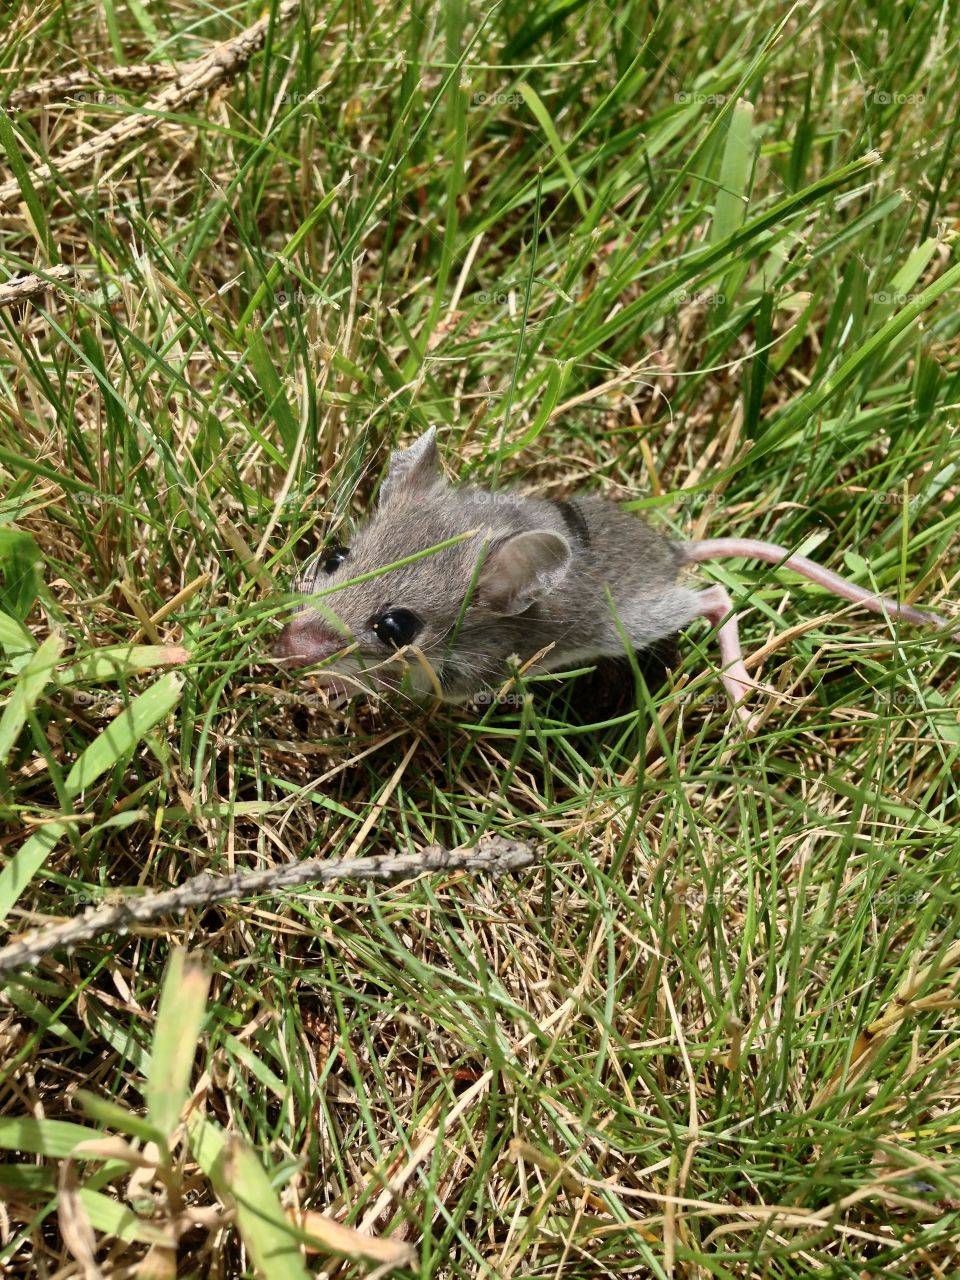 Mouse in grass.